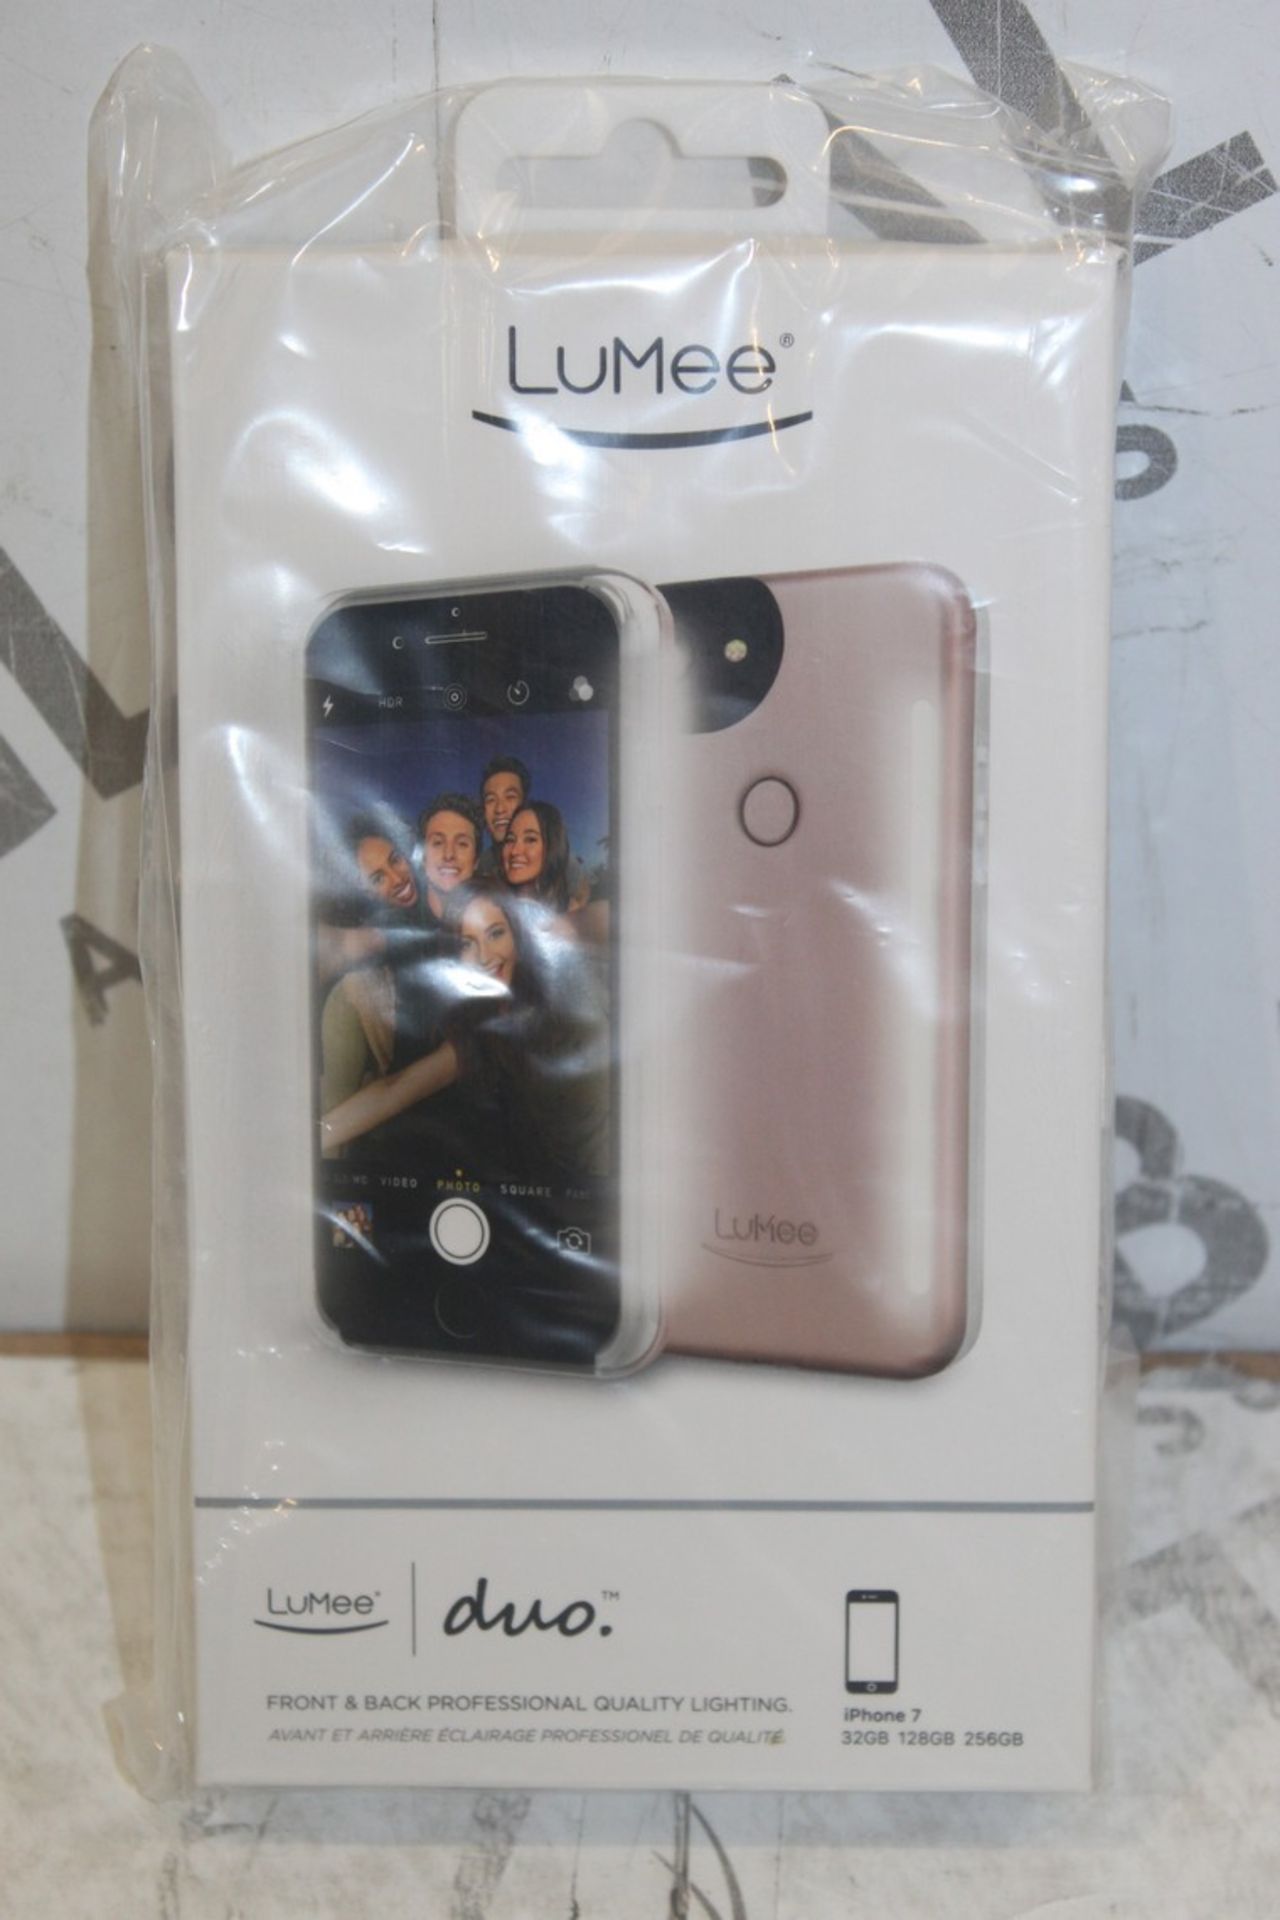 Lot To Contain 10 Lumee Duo iPhone 7 Rose Light Up Phone Cases RRP £500 (Pictures Are For